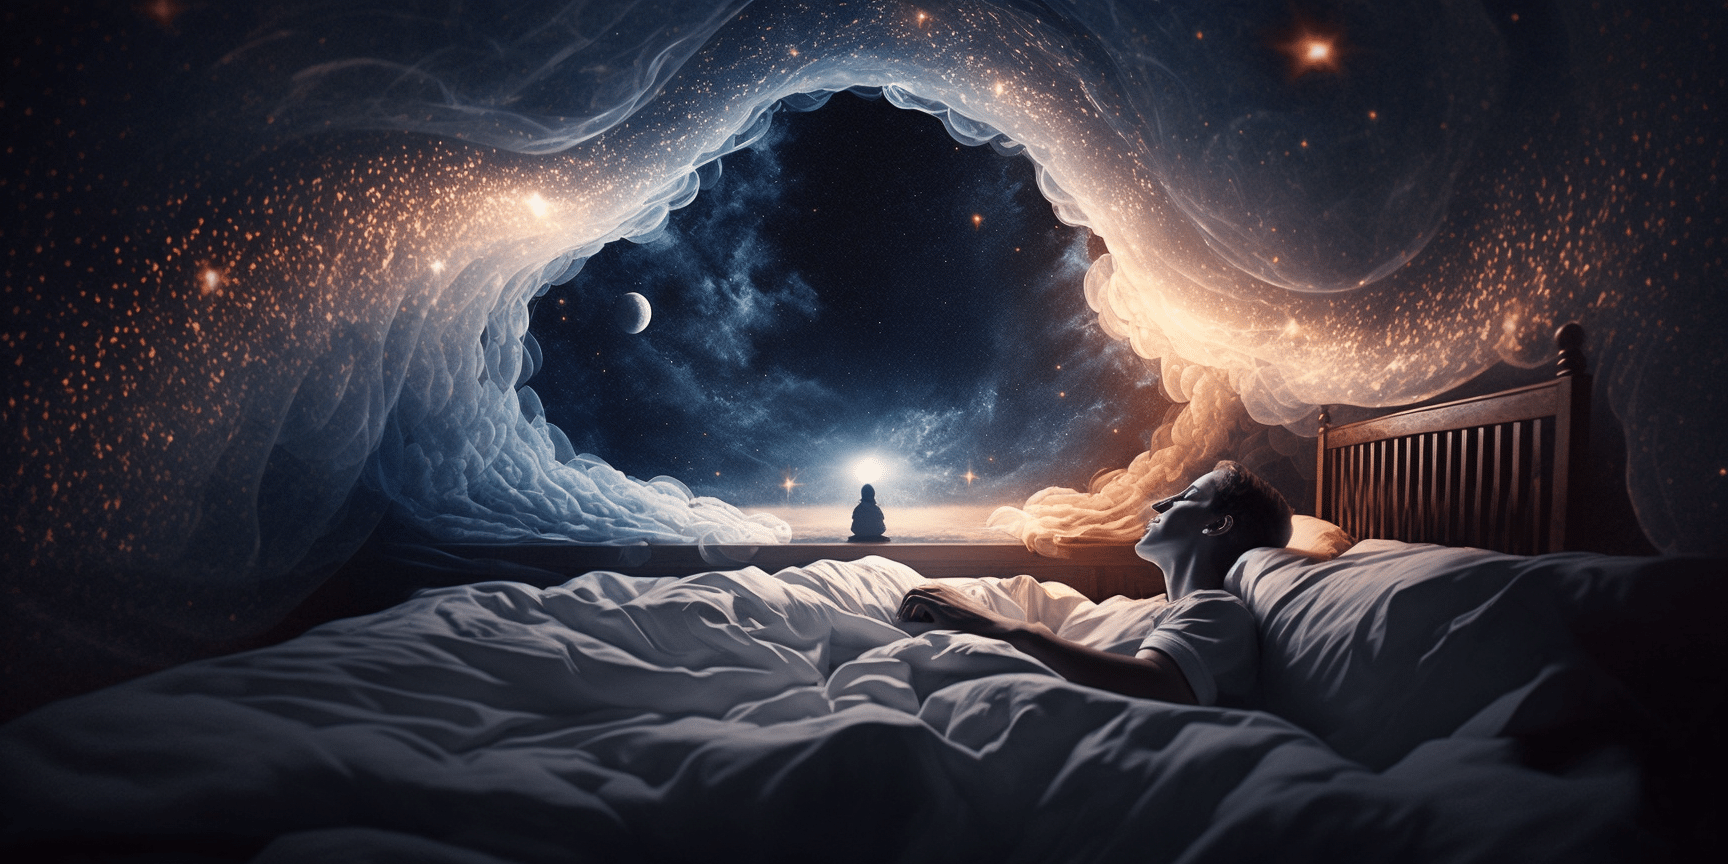 Are You Waking Up Between 3-5 AM? It Might Mean You’re Going Through a Spiritual Awakening